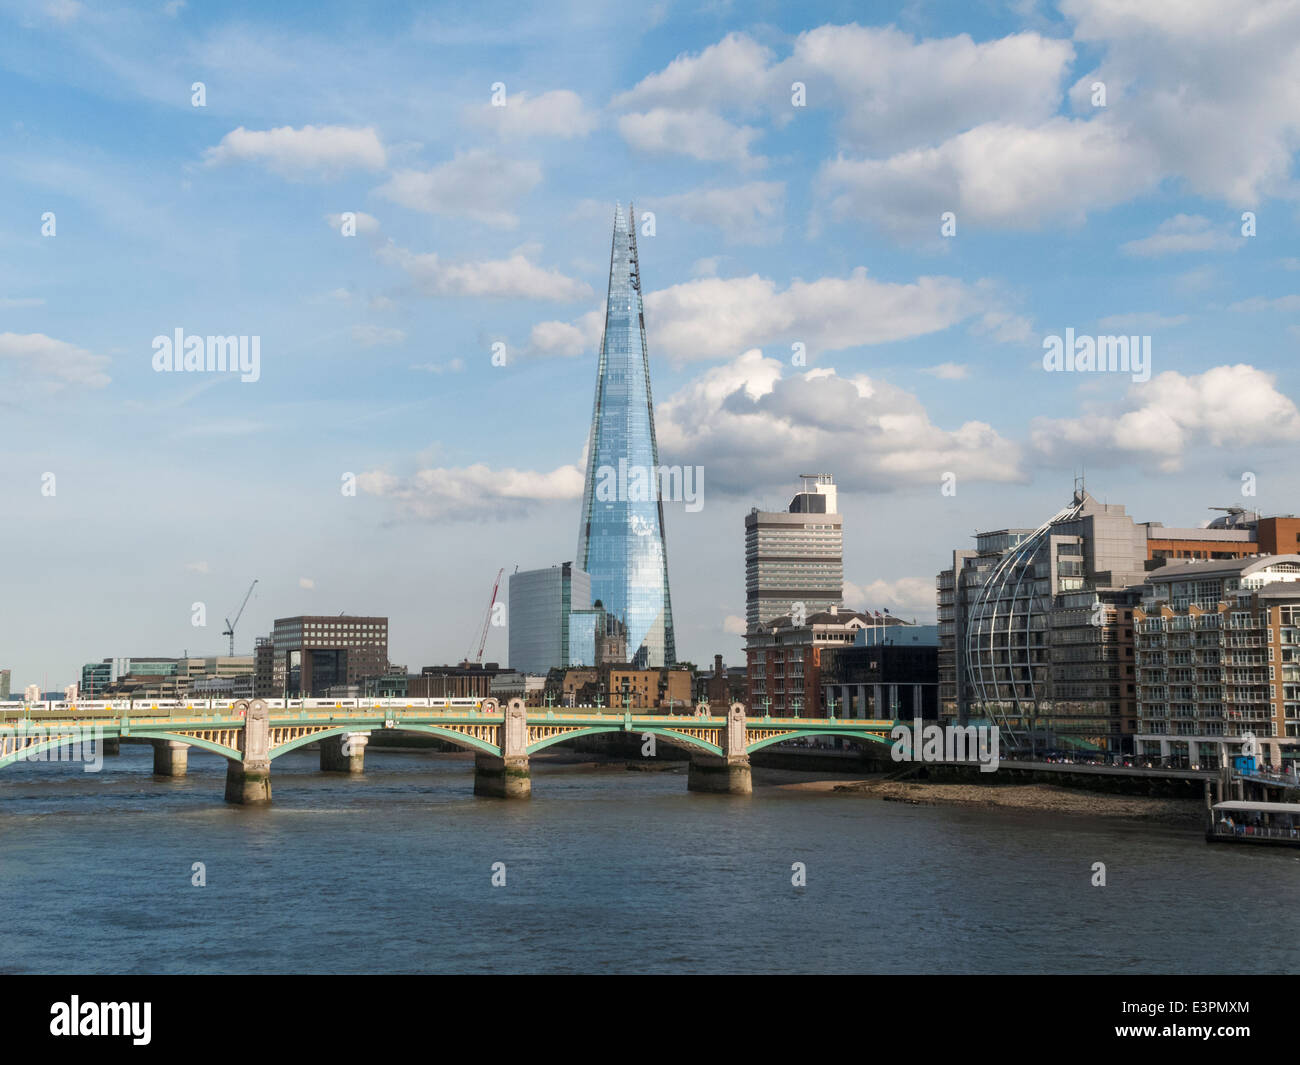 London city skyline with The Shard, Southwark Bridge and the River Thames, in summer with blue sky and white fluffy clouds Stock Photo